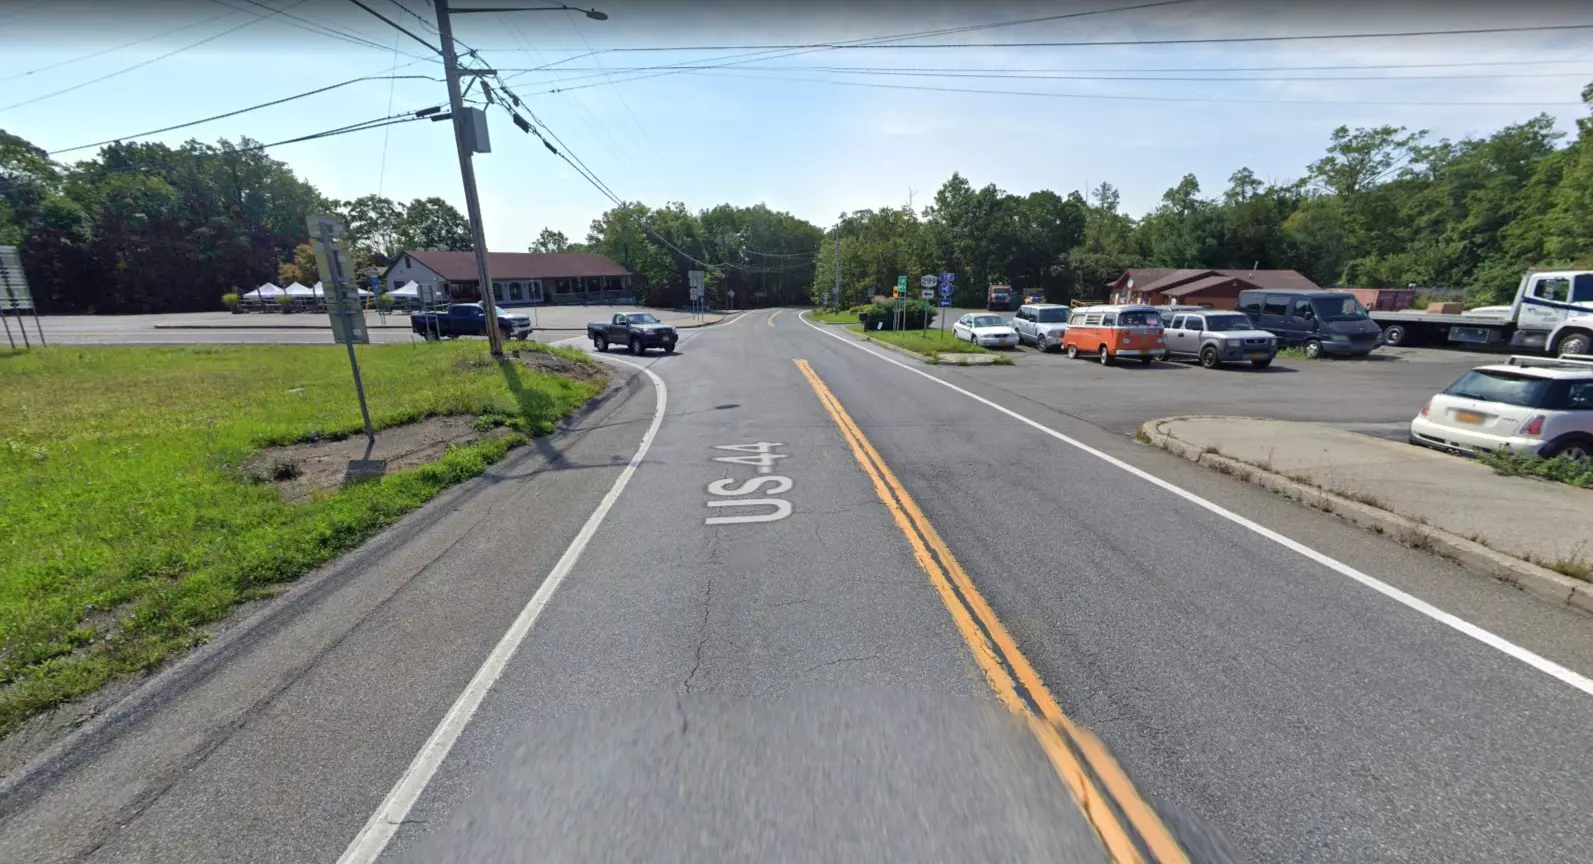 New York Driver Killed on 'Deadly' Hudson Valley Road On July 4